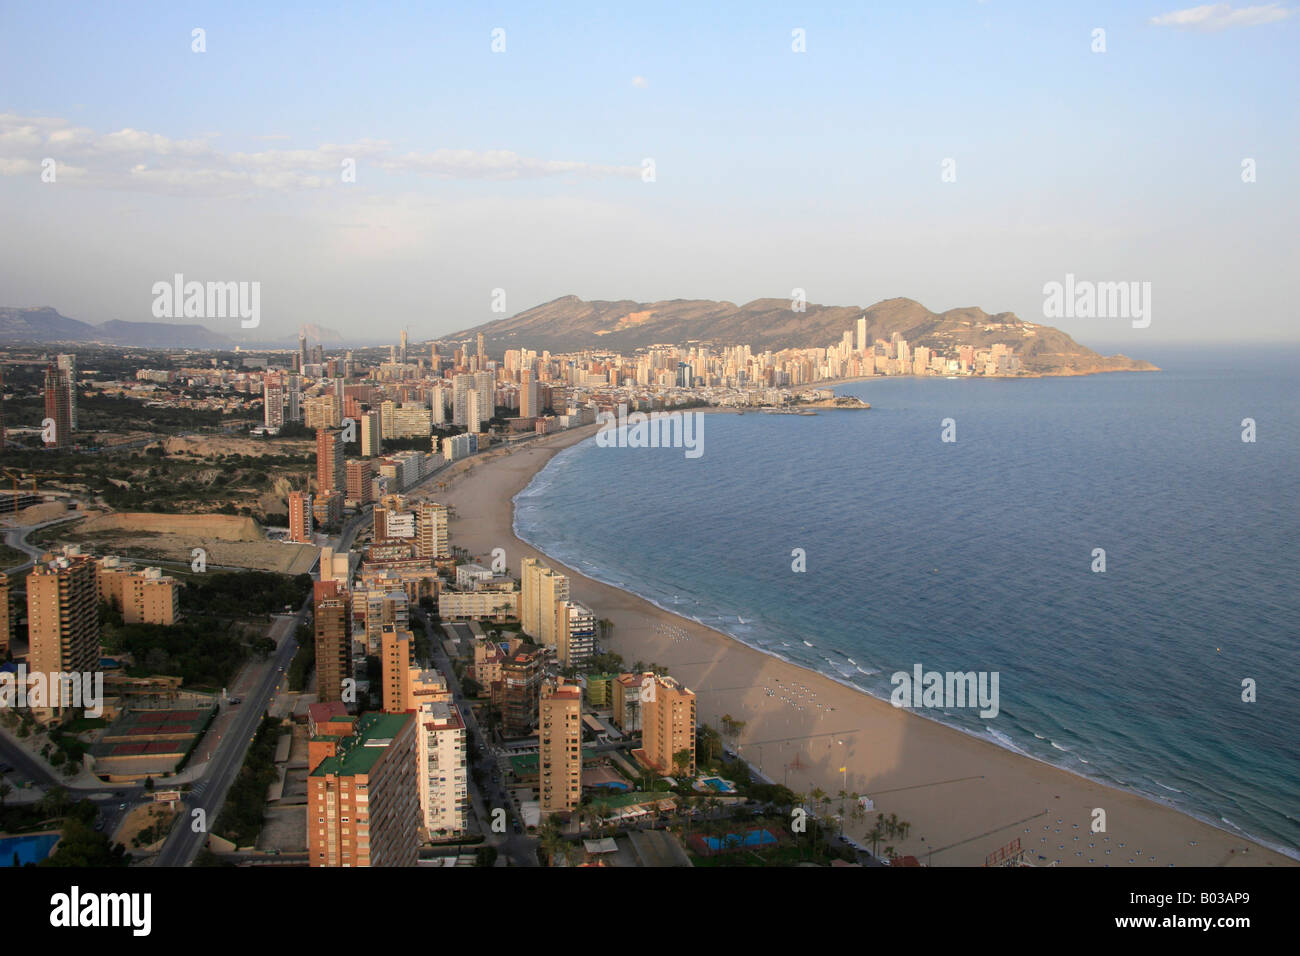 View of Benidorm, Spain from observatory roof of Hotel Bali Stock Photo